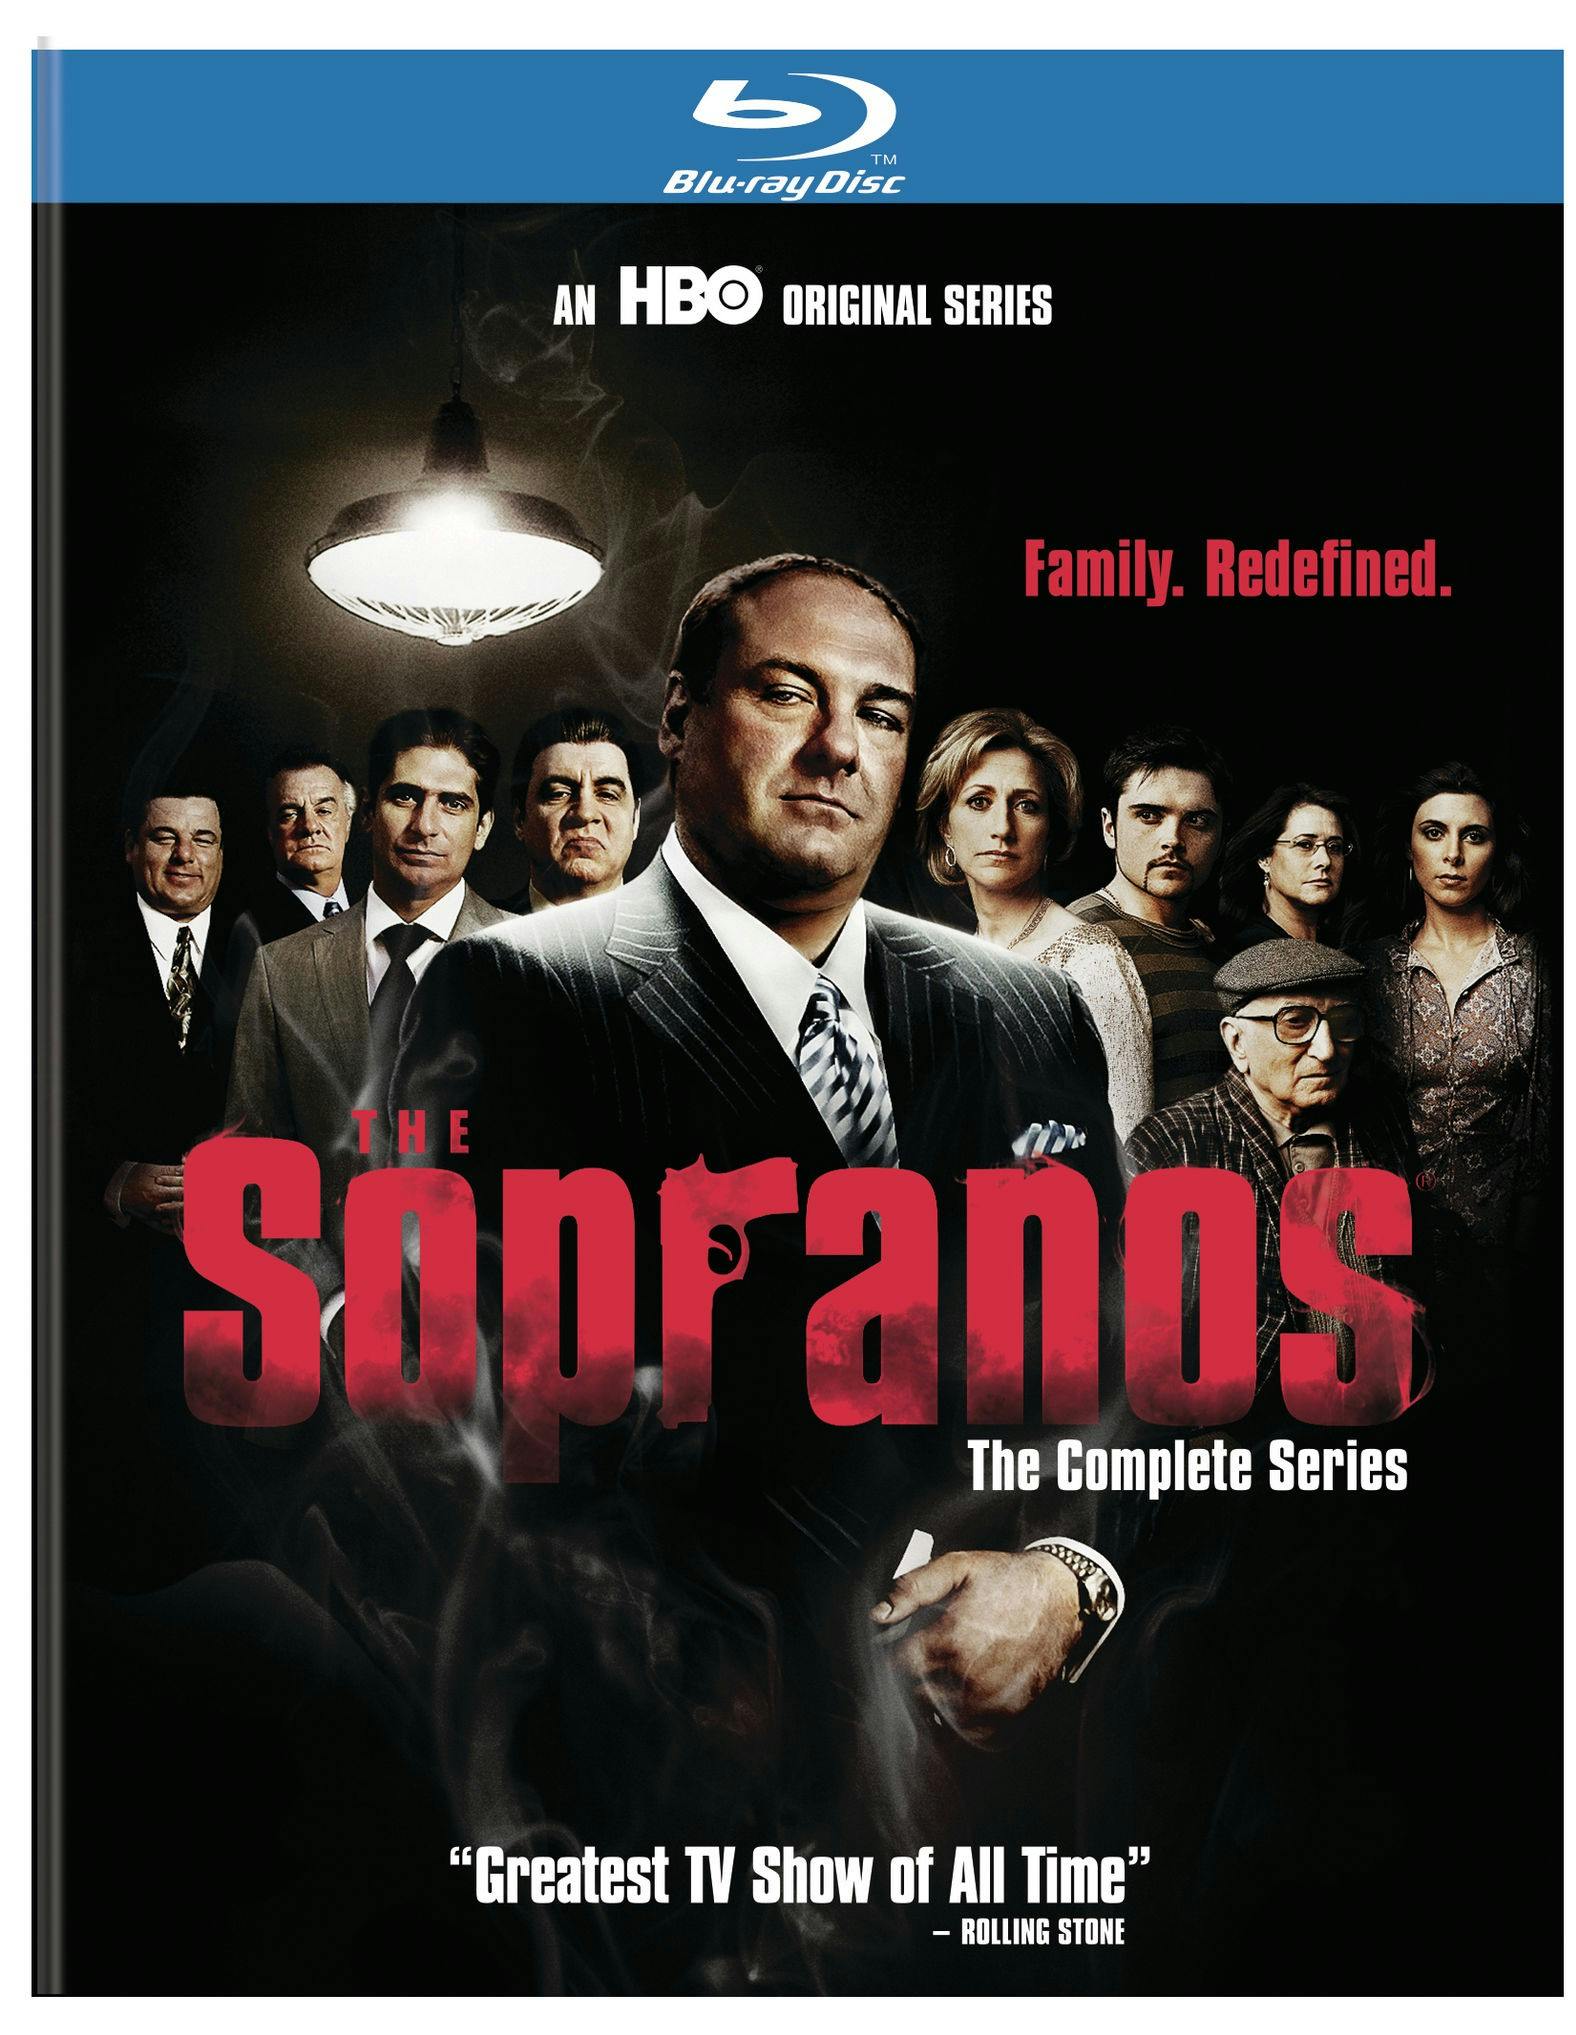 Buy The Sopranos: The Complete Series Blu-ray New Box Art Blu-ray ...